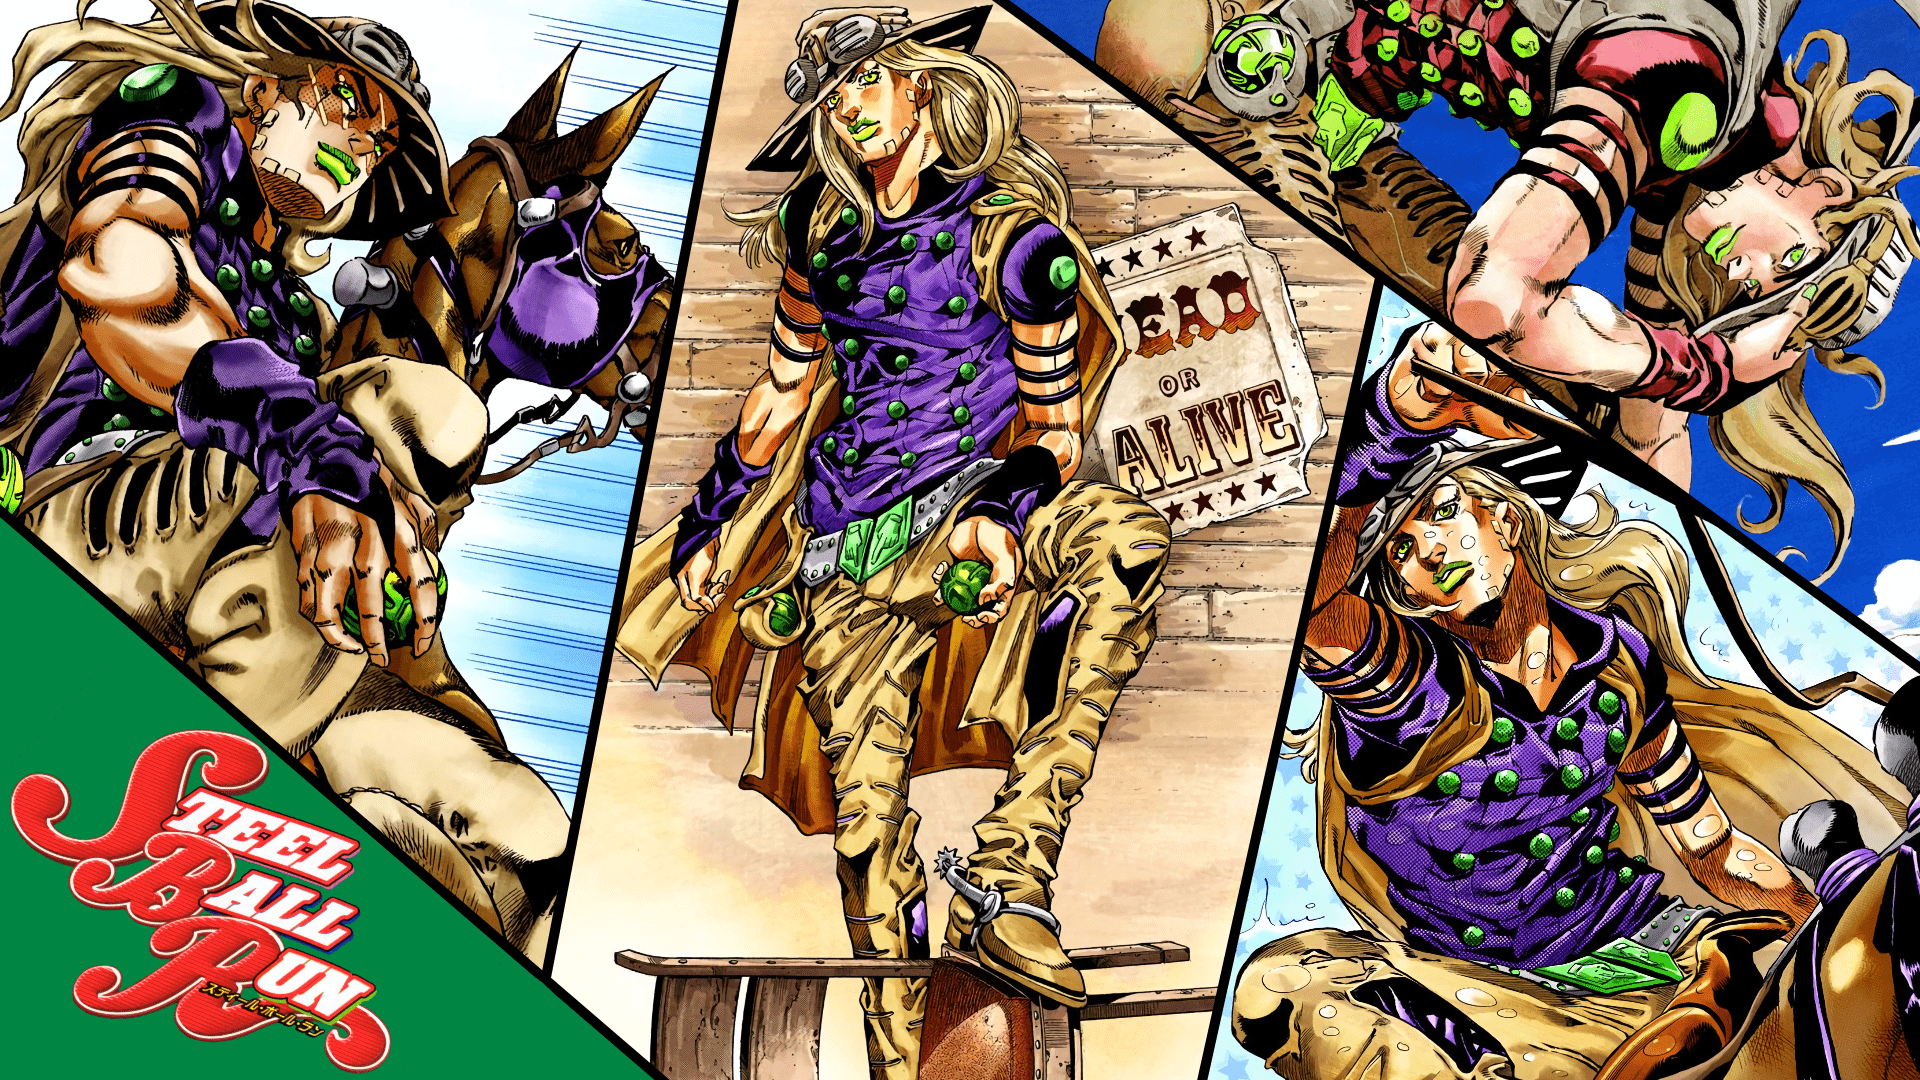 Gyro Zeppeli wallpaper by FEELQUEEN  Download on ZEDGE  a2ff